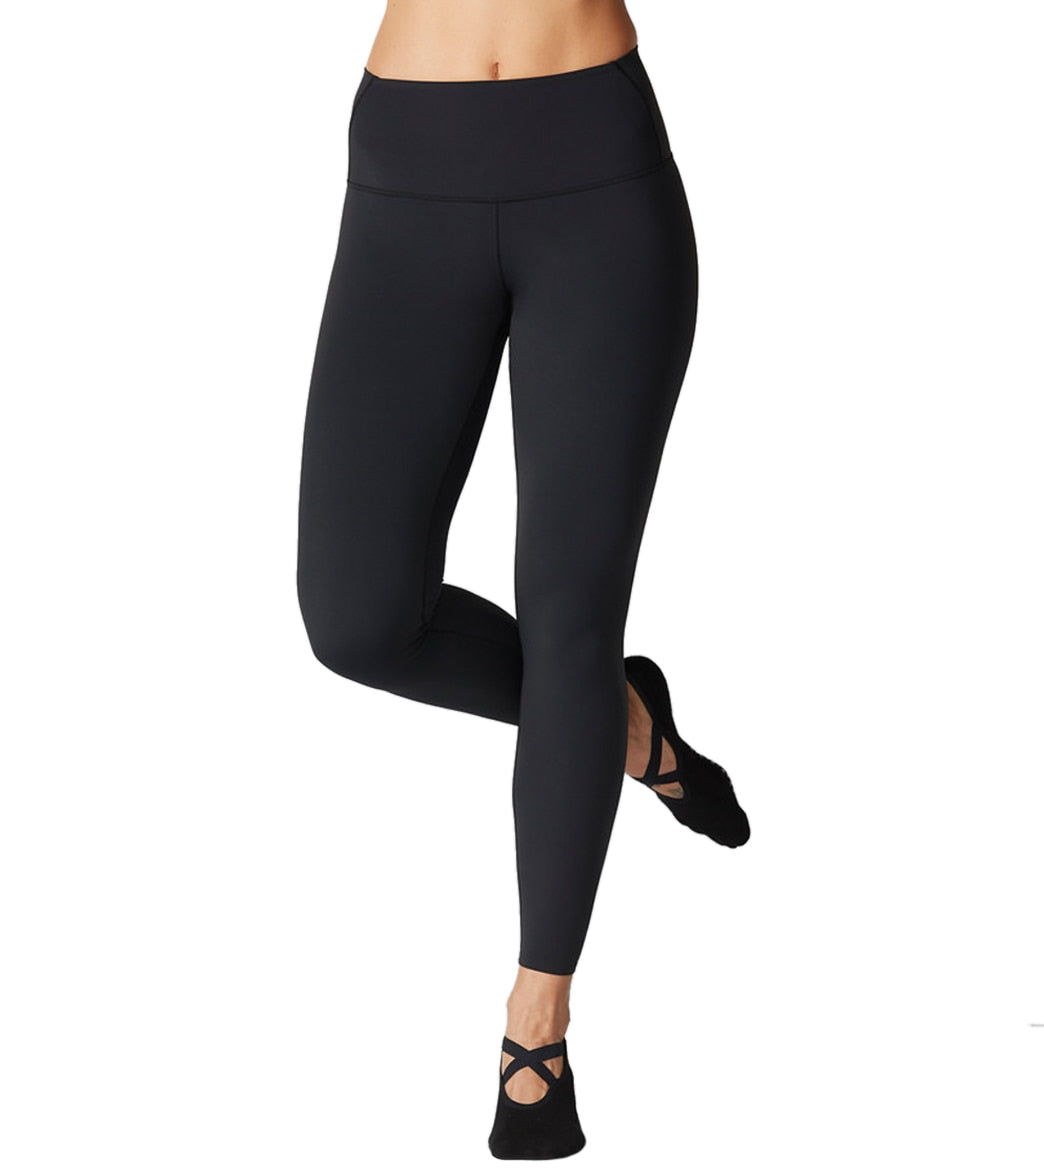  Tavi Women's High Waisted 7/8 Tight, 25-Inch Inseam, Comfortable  Leggings with Pockets